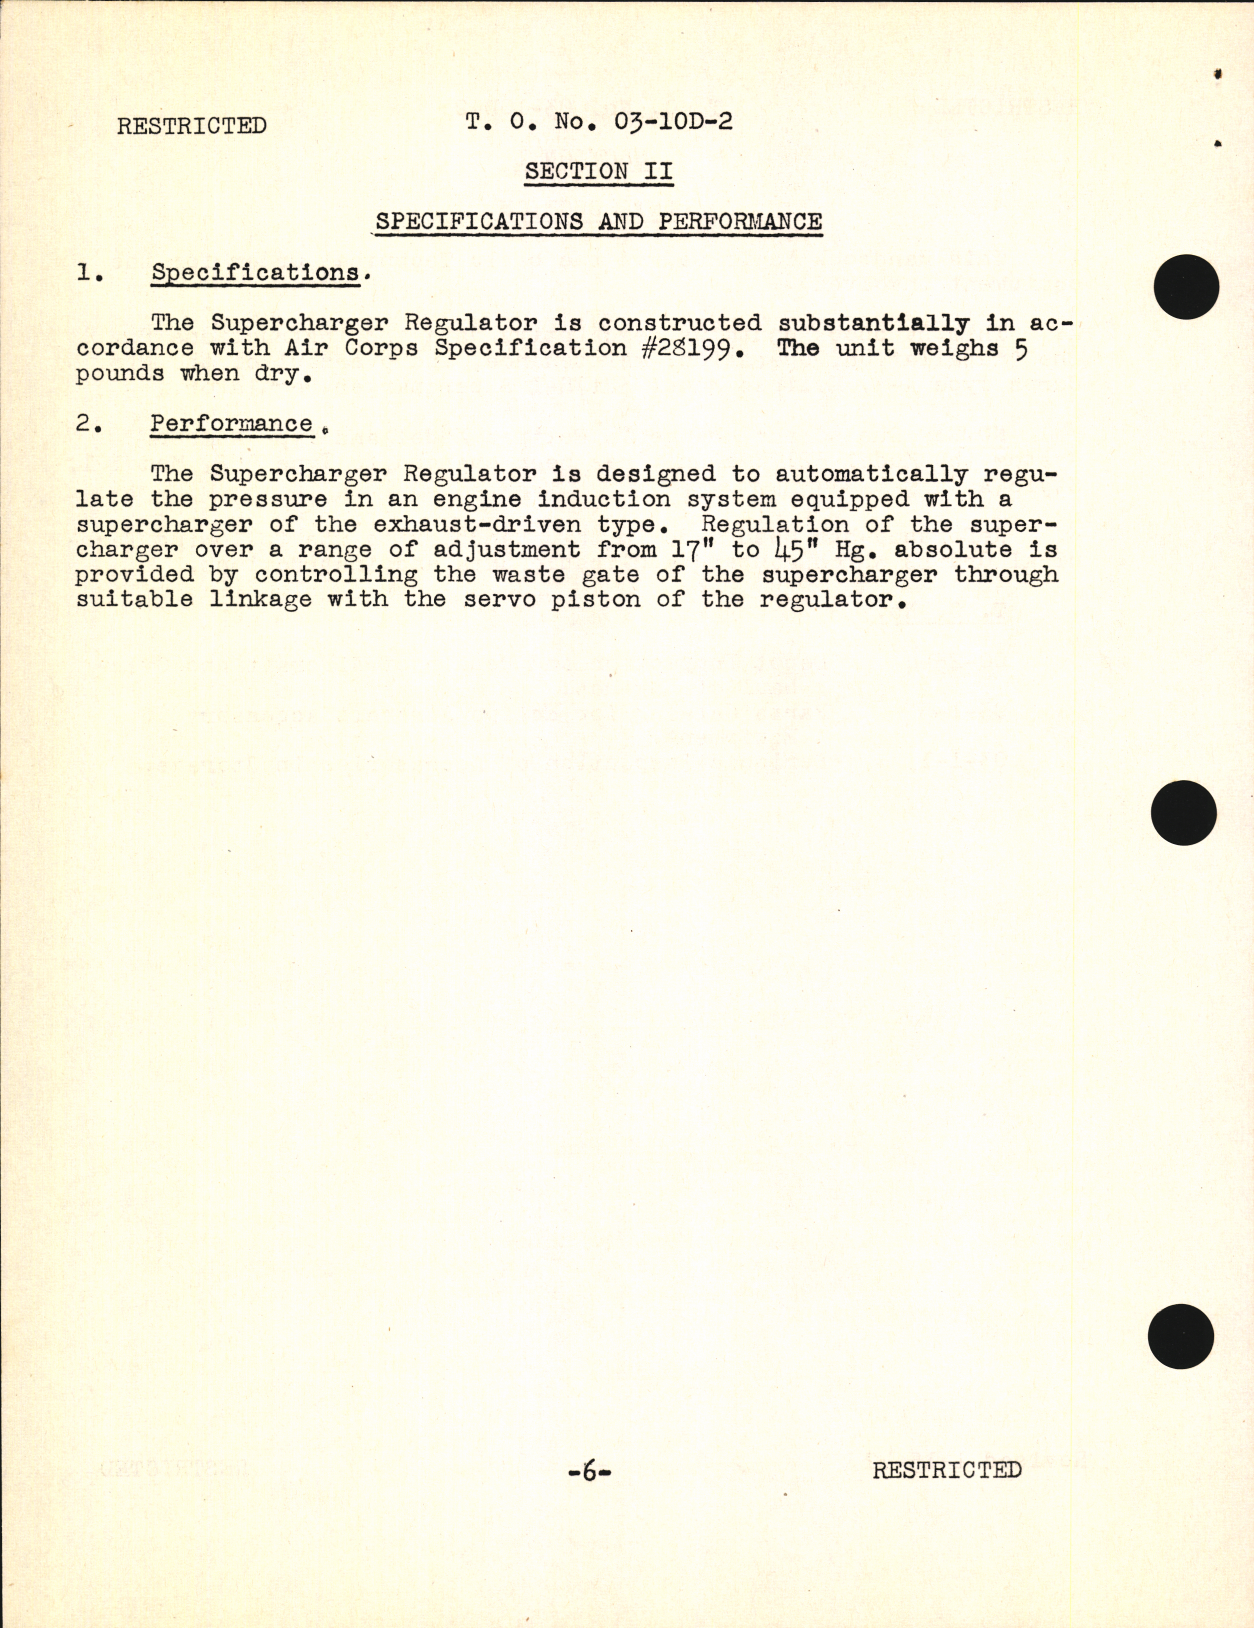 Sample page 8 from AirCorps Library document: Preliminary Handbook of Instructions for Type A-7 Supercharger Regulator